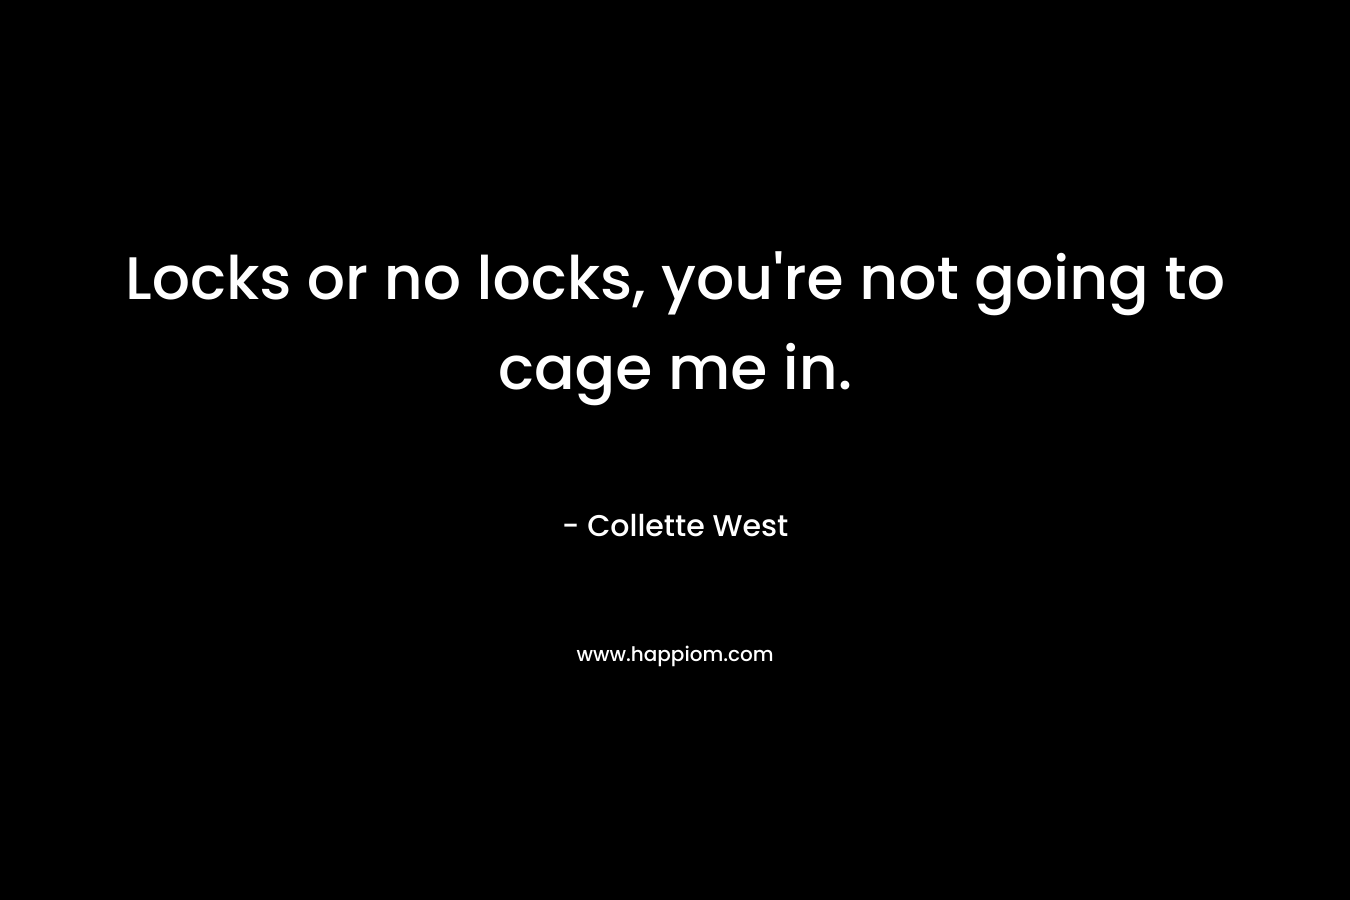 Locks or no locks, you're not going to cage me in.